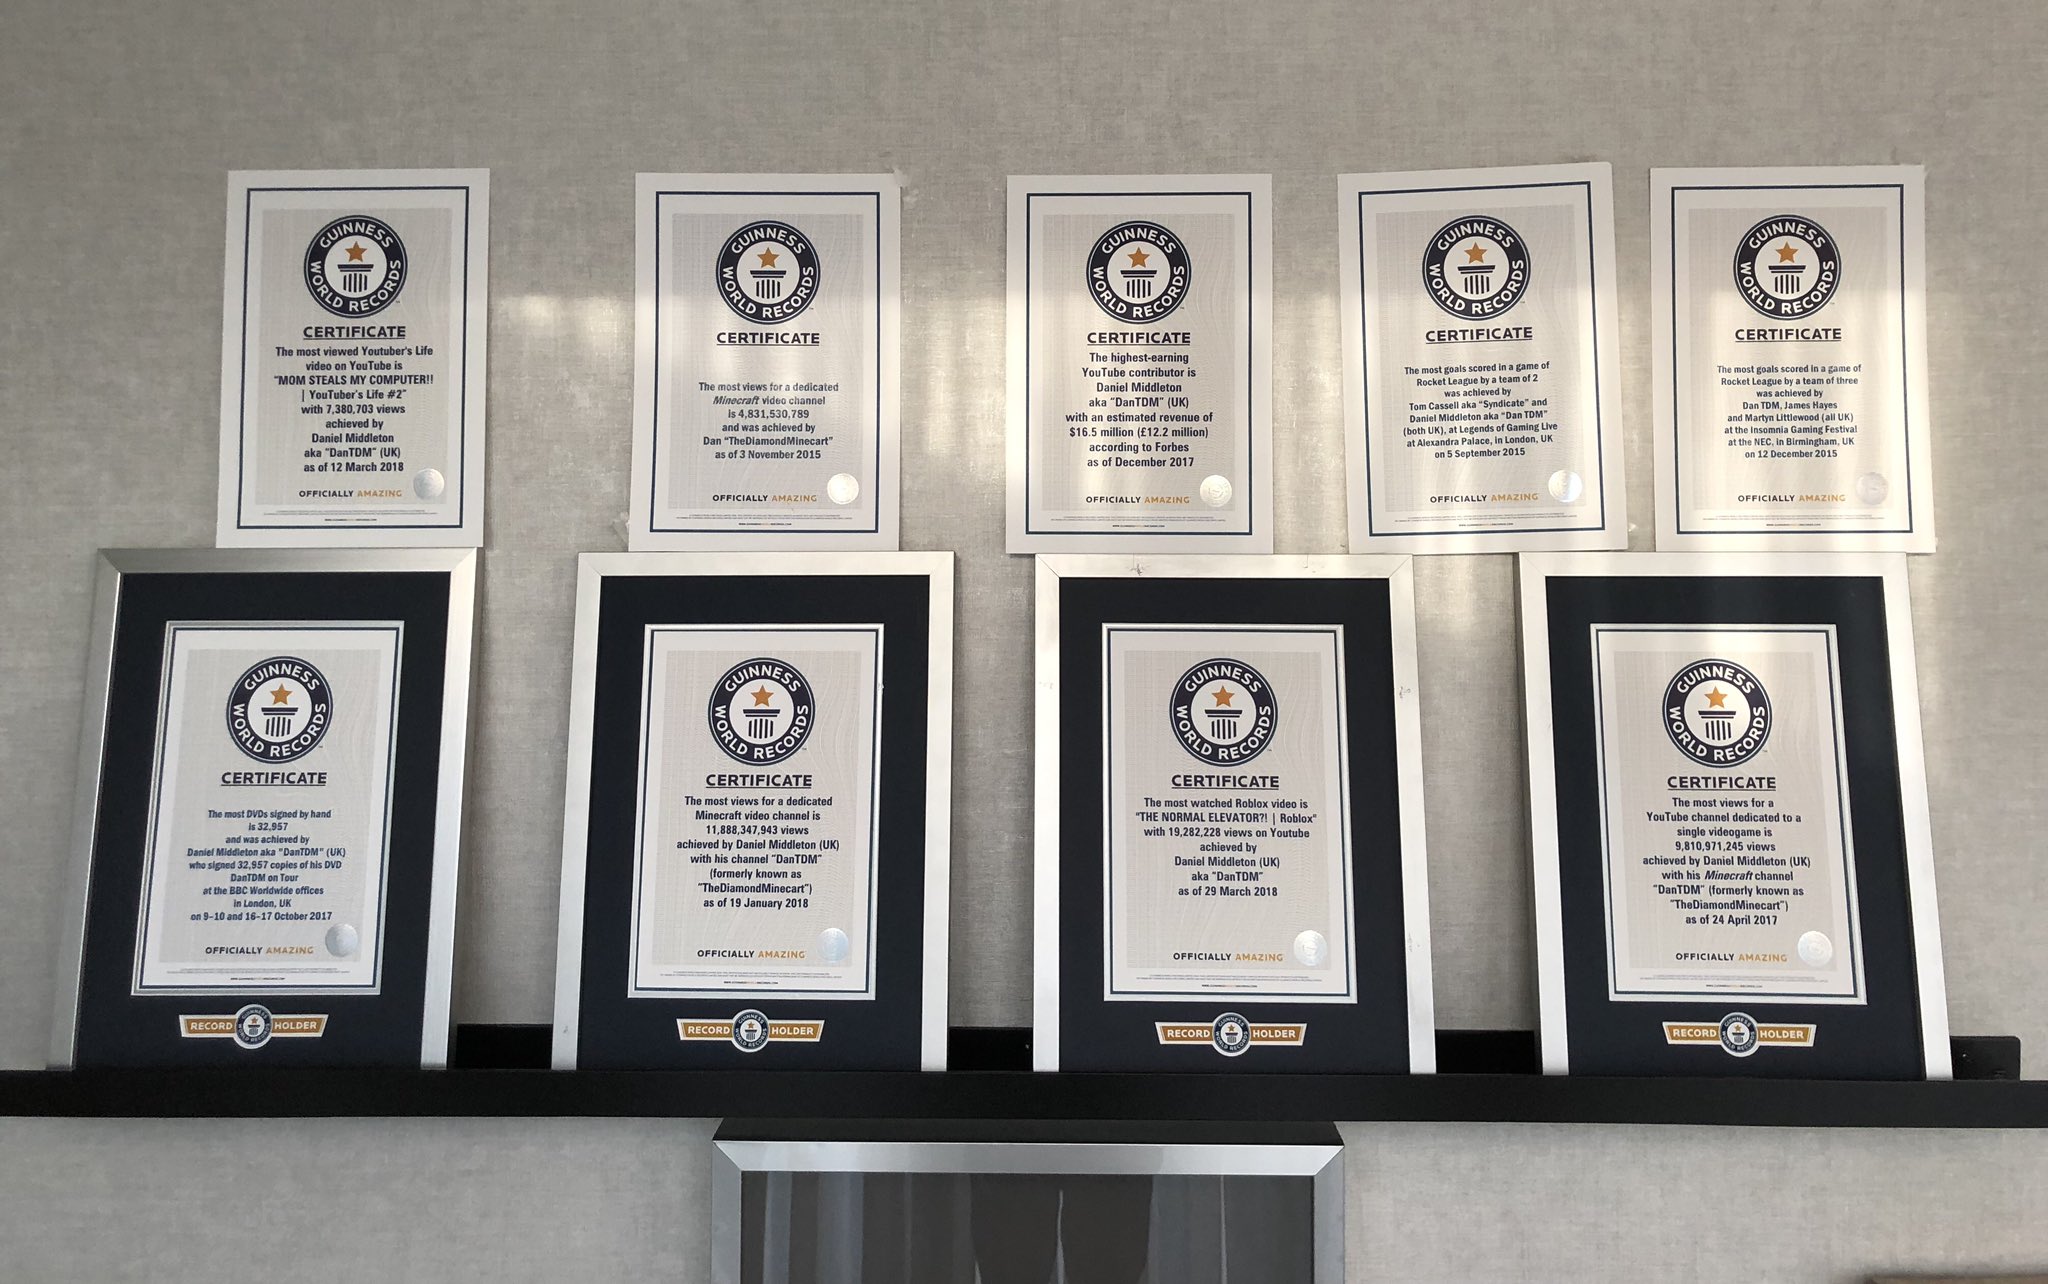 ᴅᴀɴᴛᴅᴍ On Twitter Here Comes A Weird Flex But Okay Got Delivery Of 5 New Guinness World Records Today I Now Have 9 That S Insane Https T Co Uogehmvtl7 - dantdm roblox 7